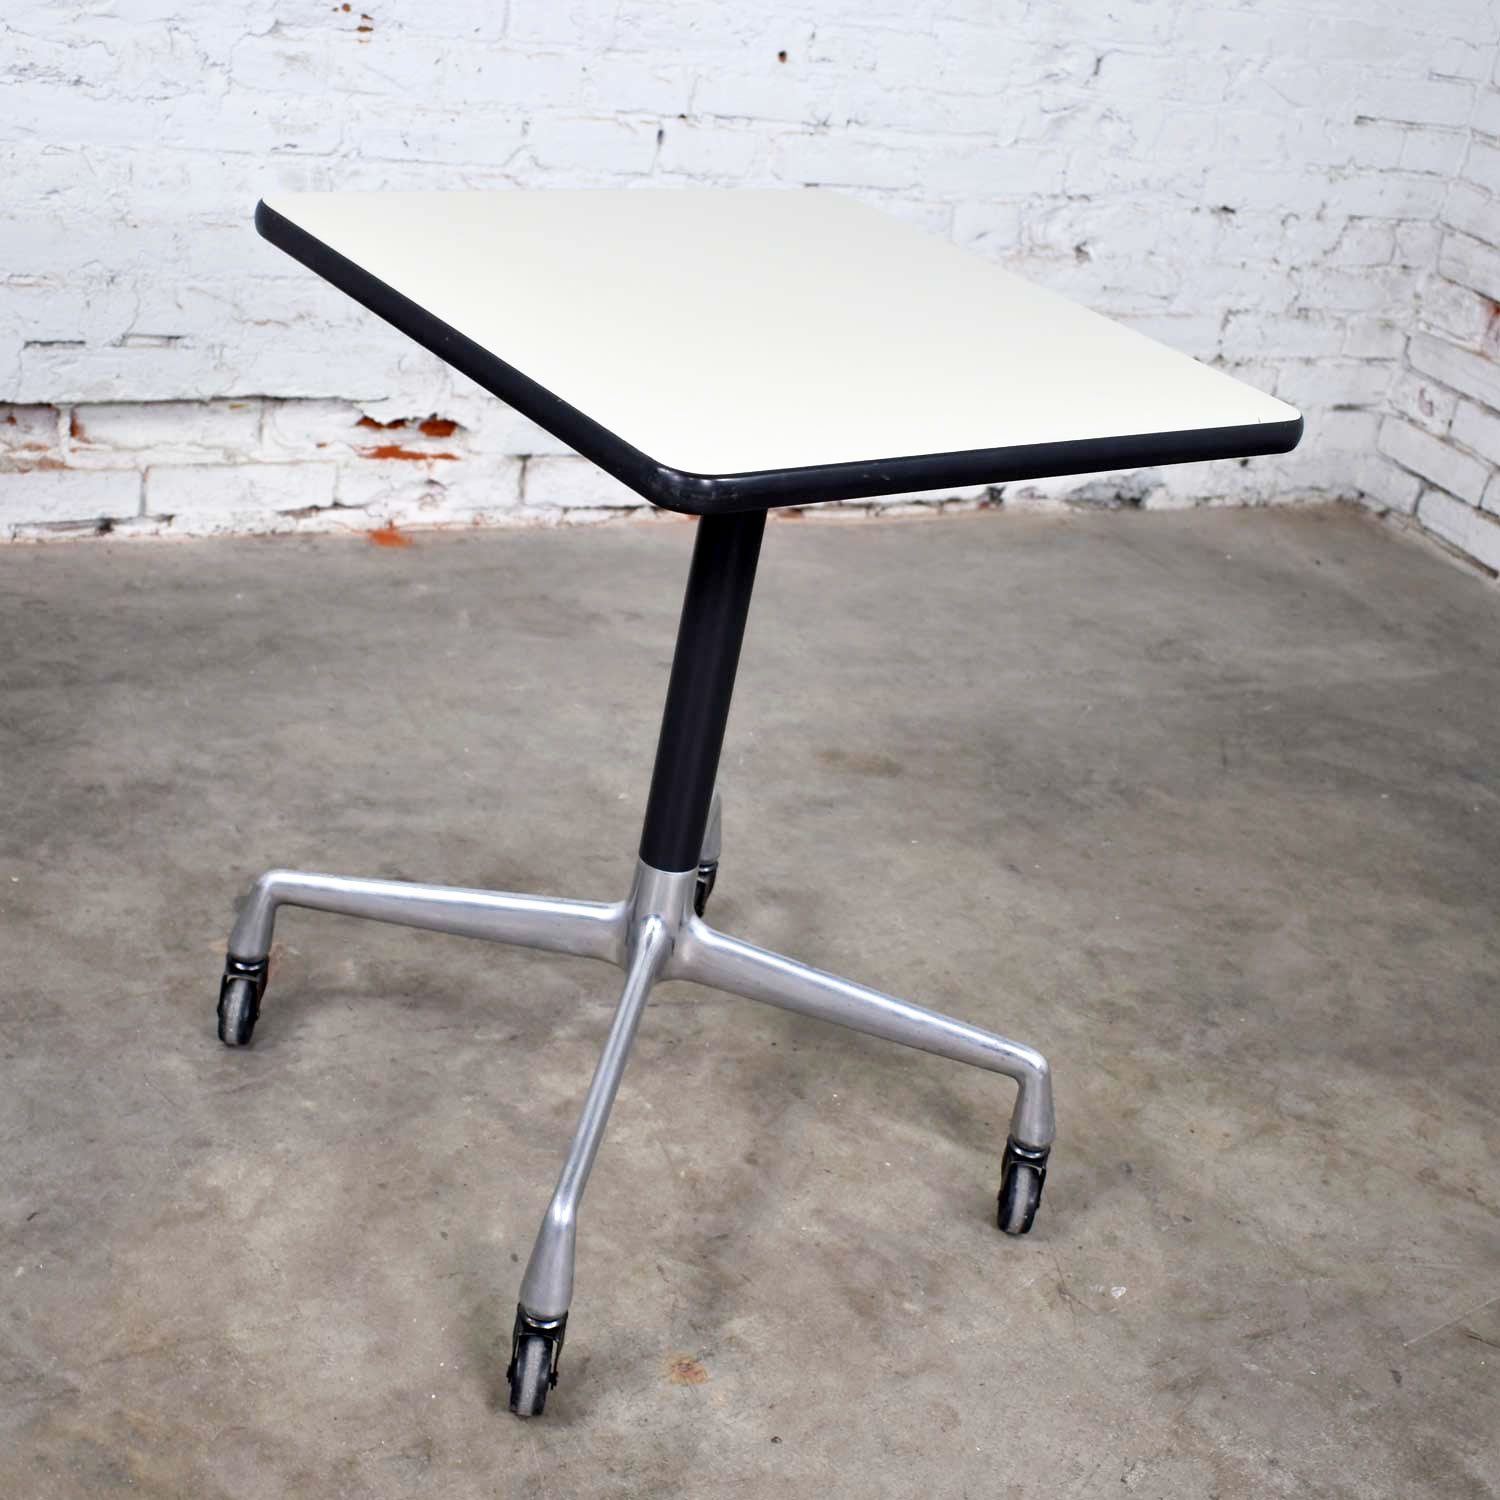 Vintage Eames for Herman Miller Square Rolling Side Table Universal Base White Laminate Top